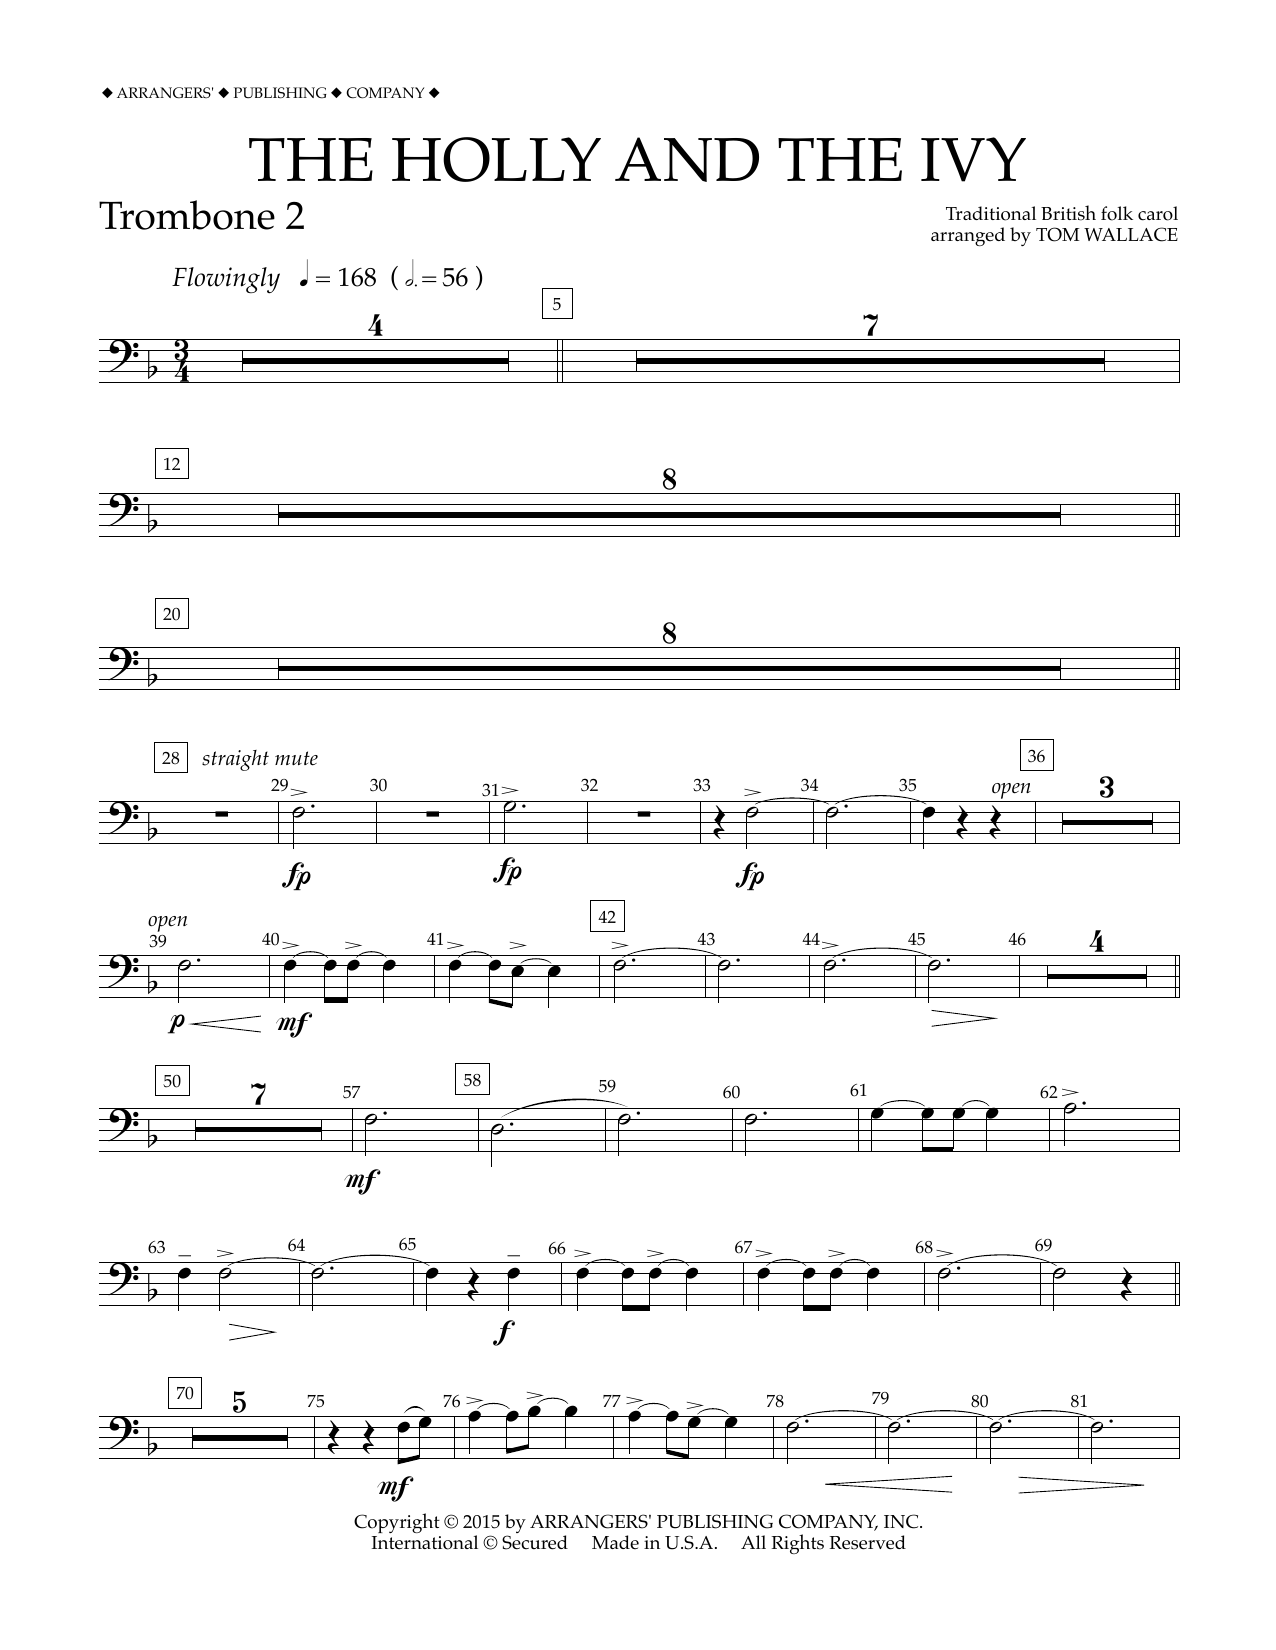 Download Tom Wallace The Holly and the Ivy - Trombone 2 Sheet Music